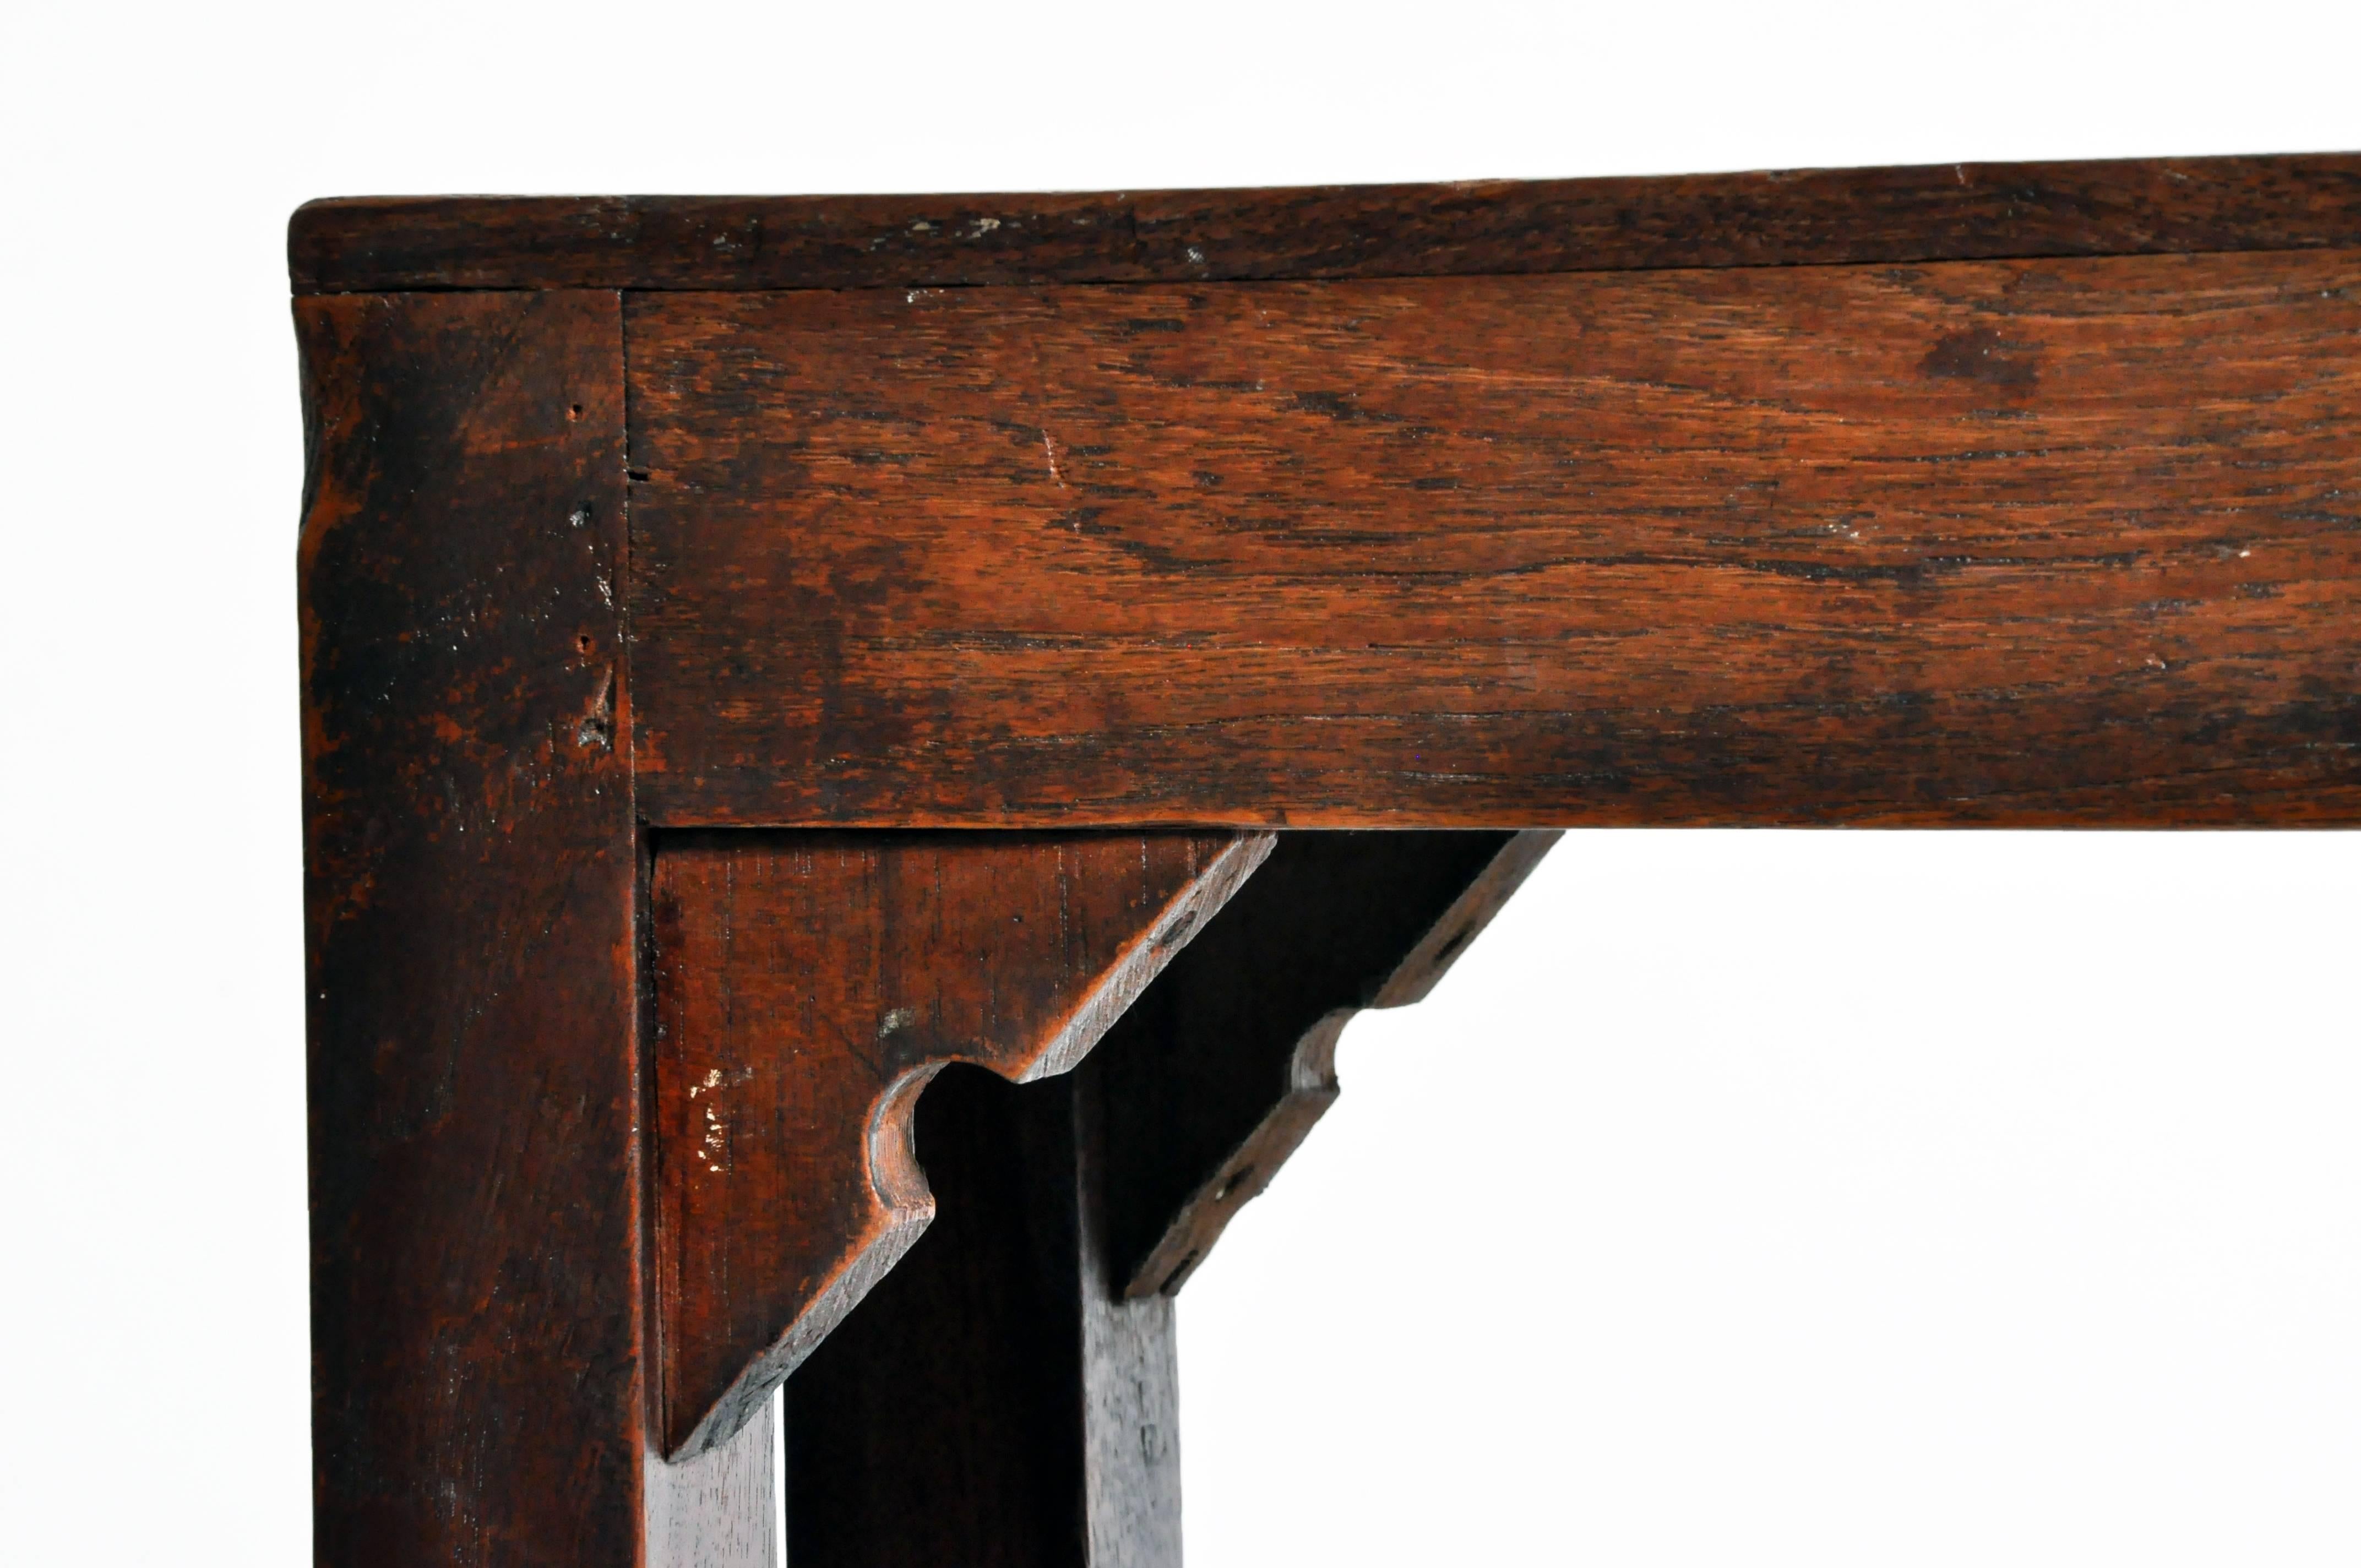 20th Century British Colonial Altar Table with Original Patina